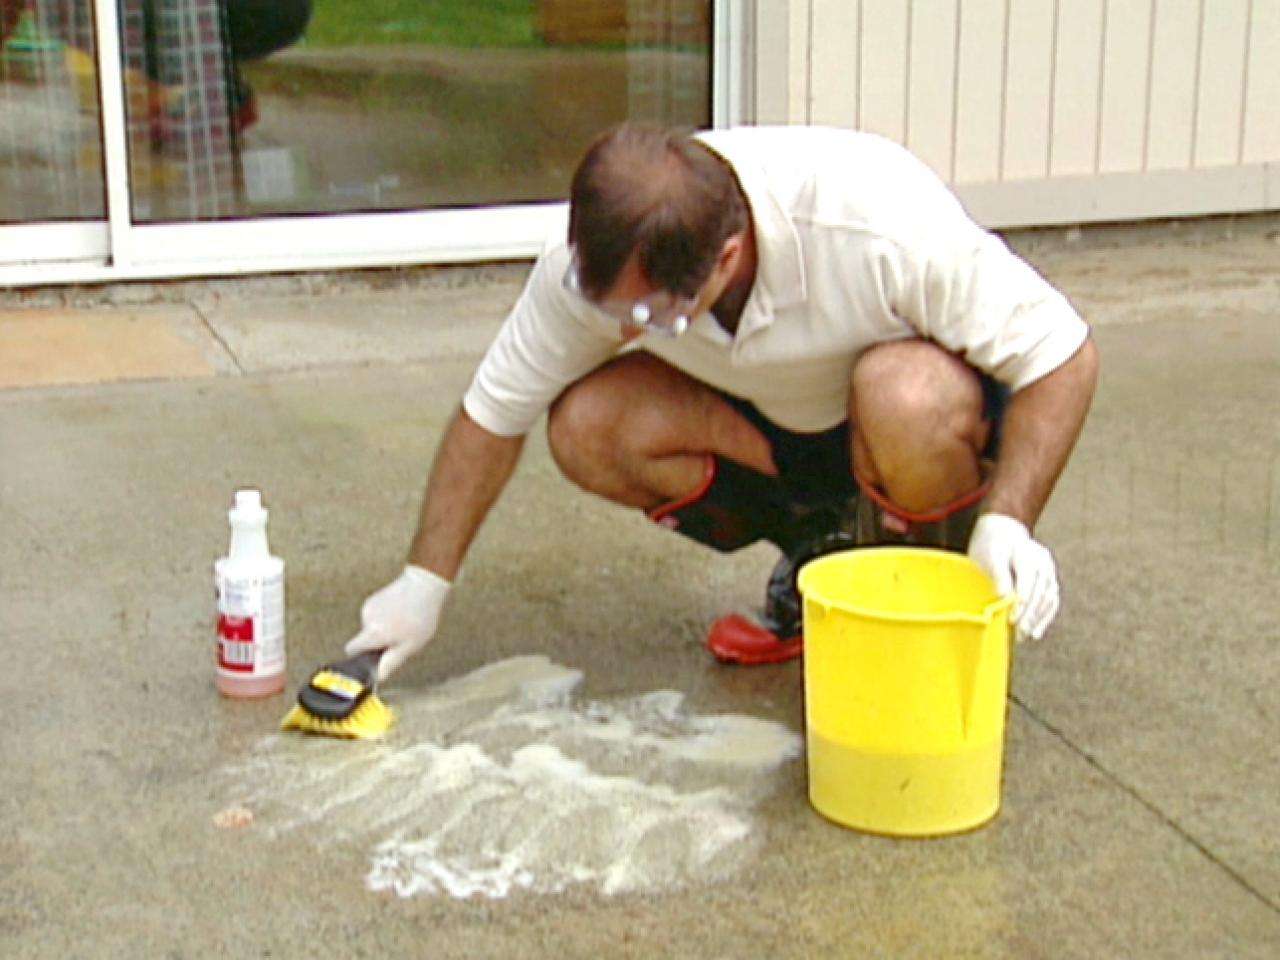 How to Stain Concrete